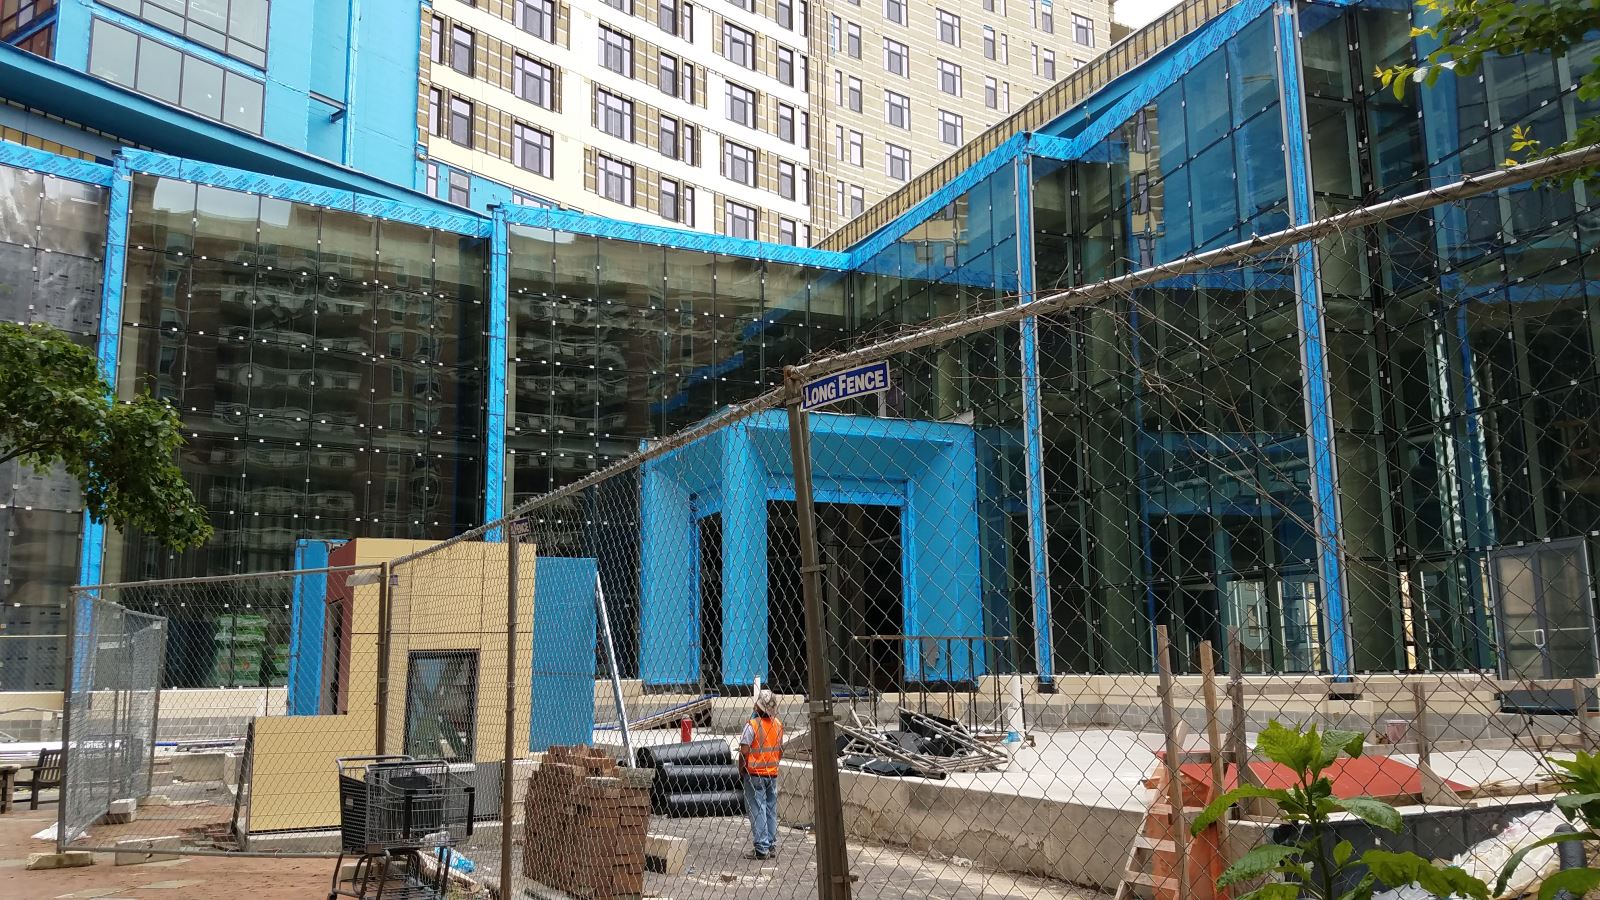 View of ongoing construction at the main entrance to the building